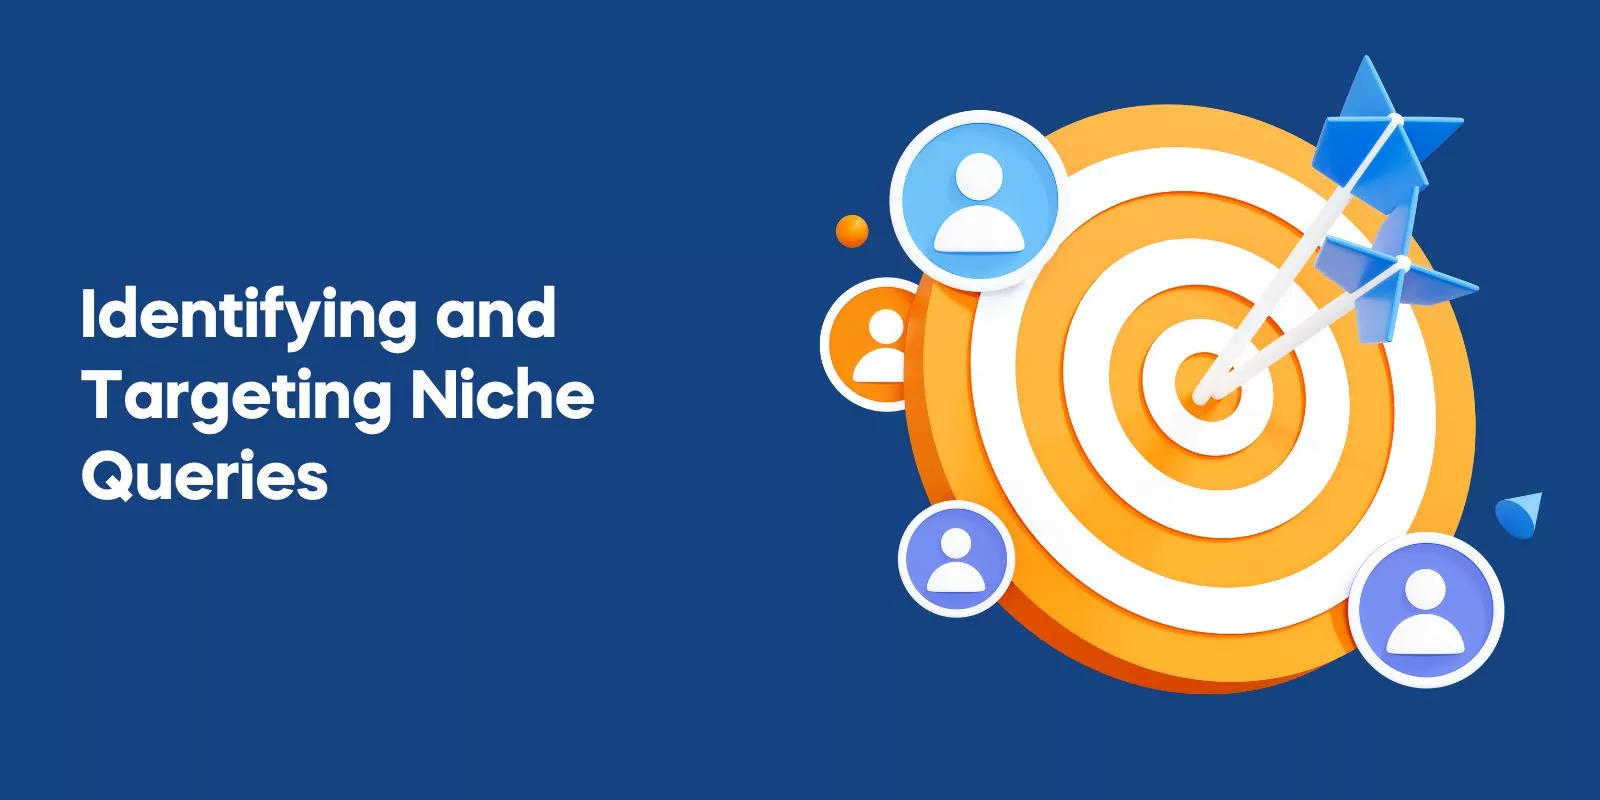 Identifying and Targeting Niche Queries